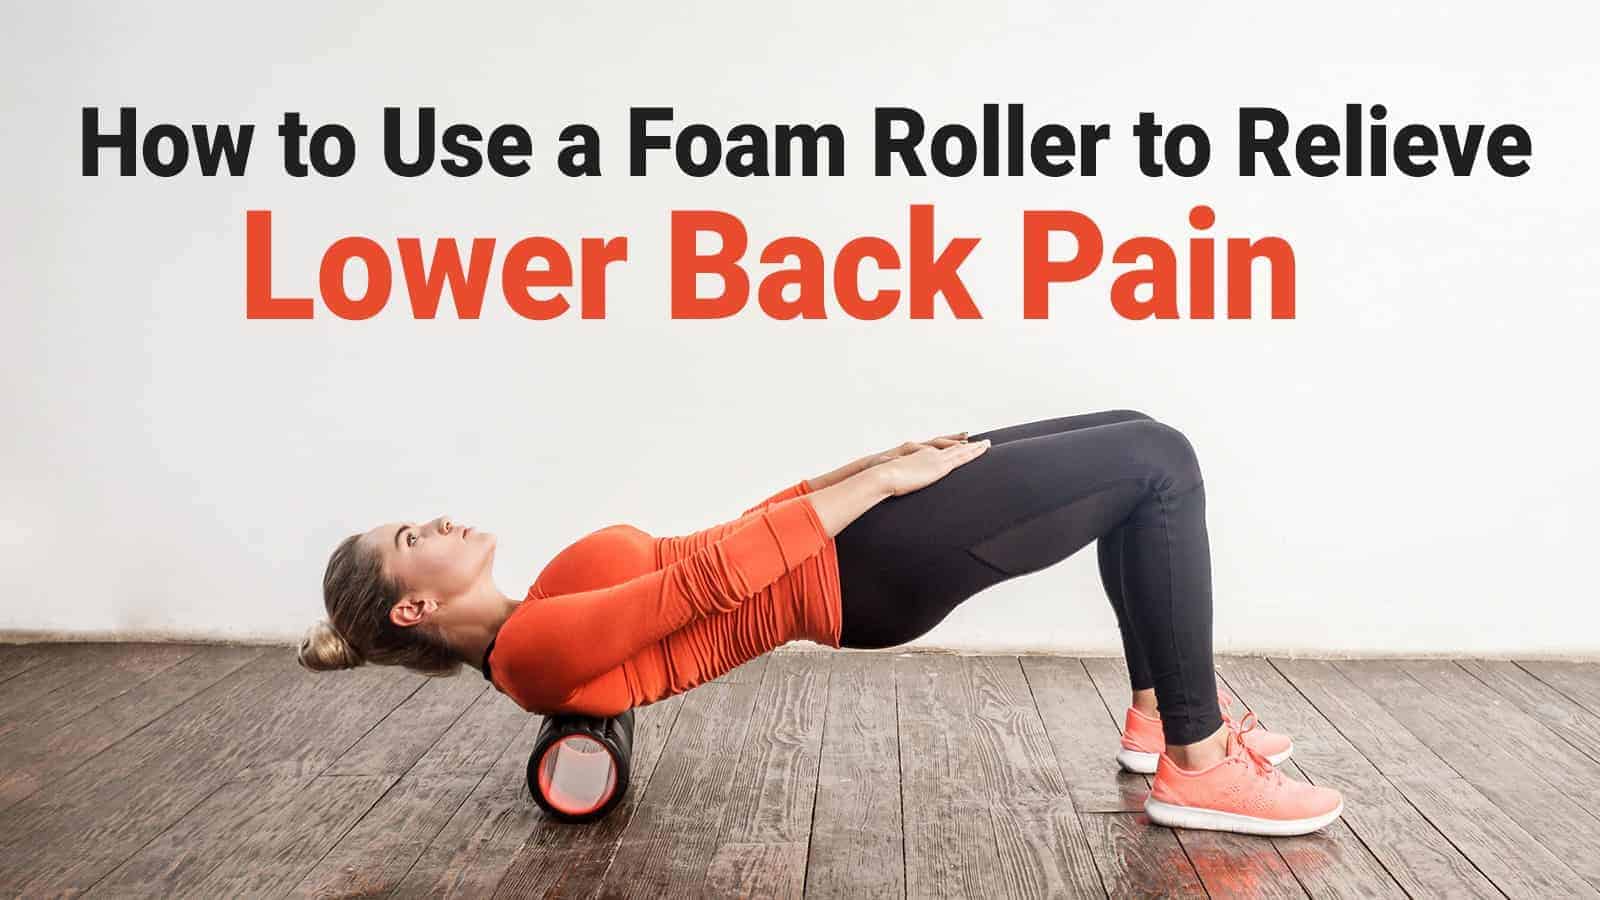 How to Use a Foam Roller to Relieve Lower Back Pain